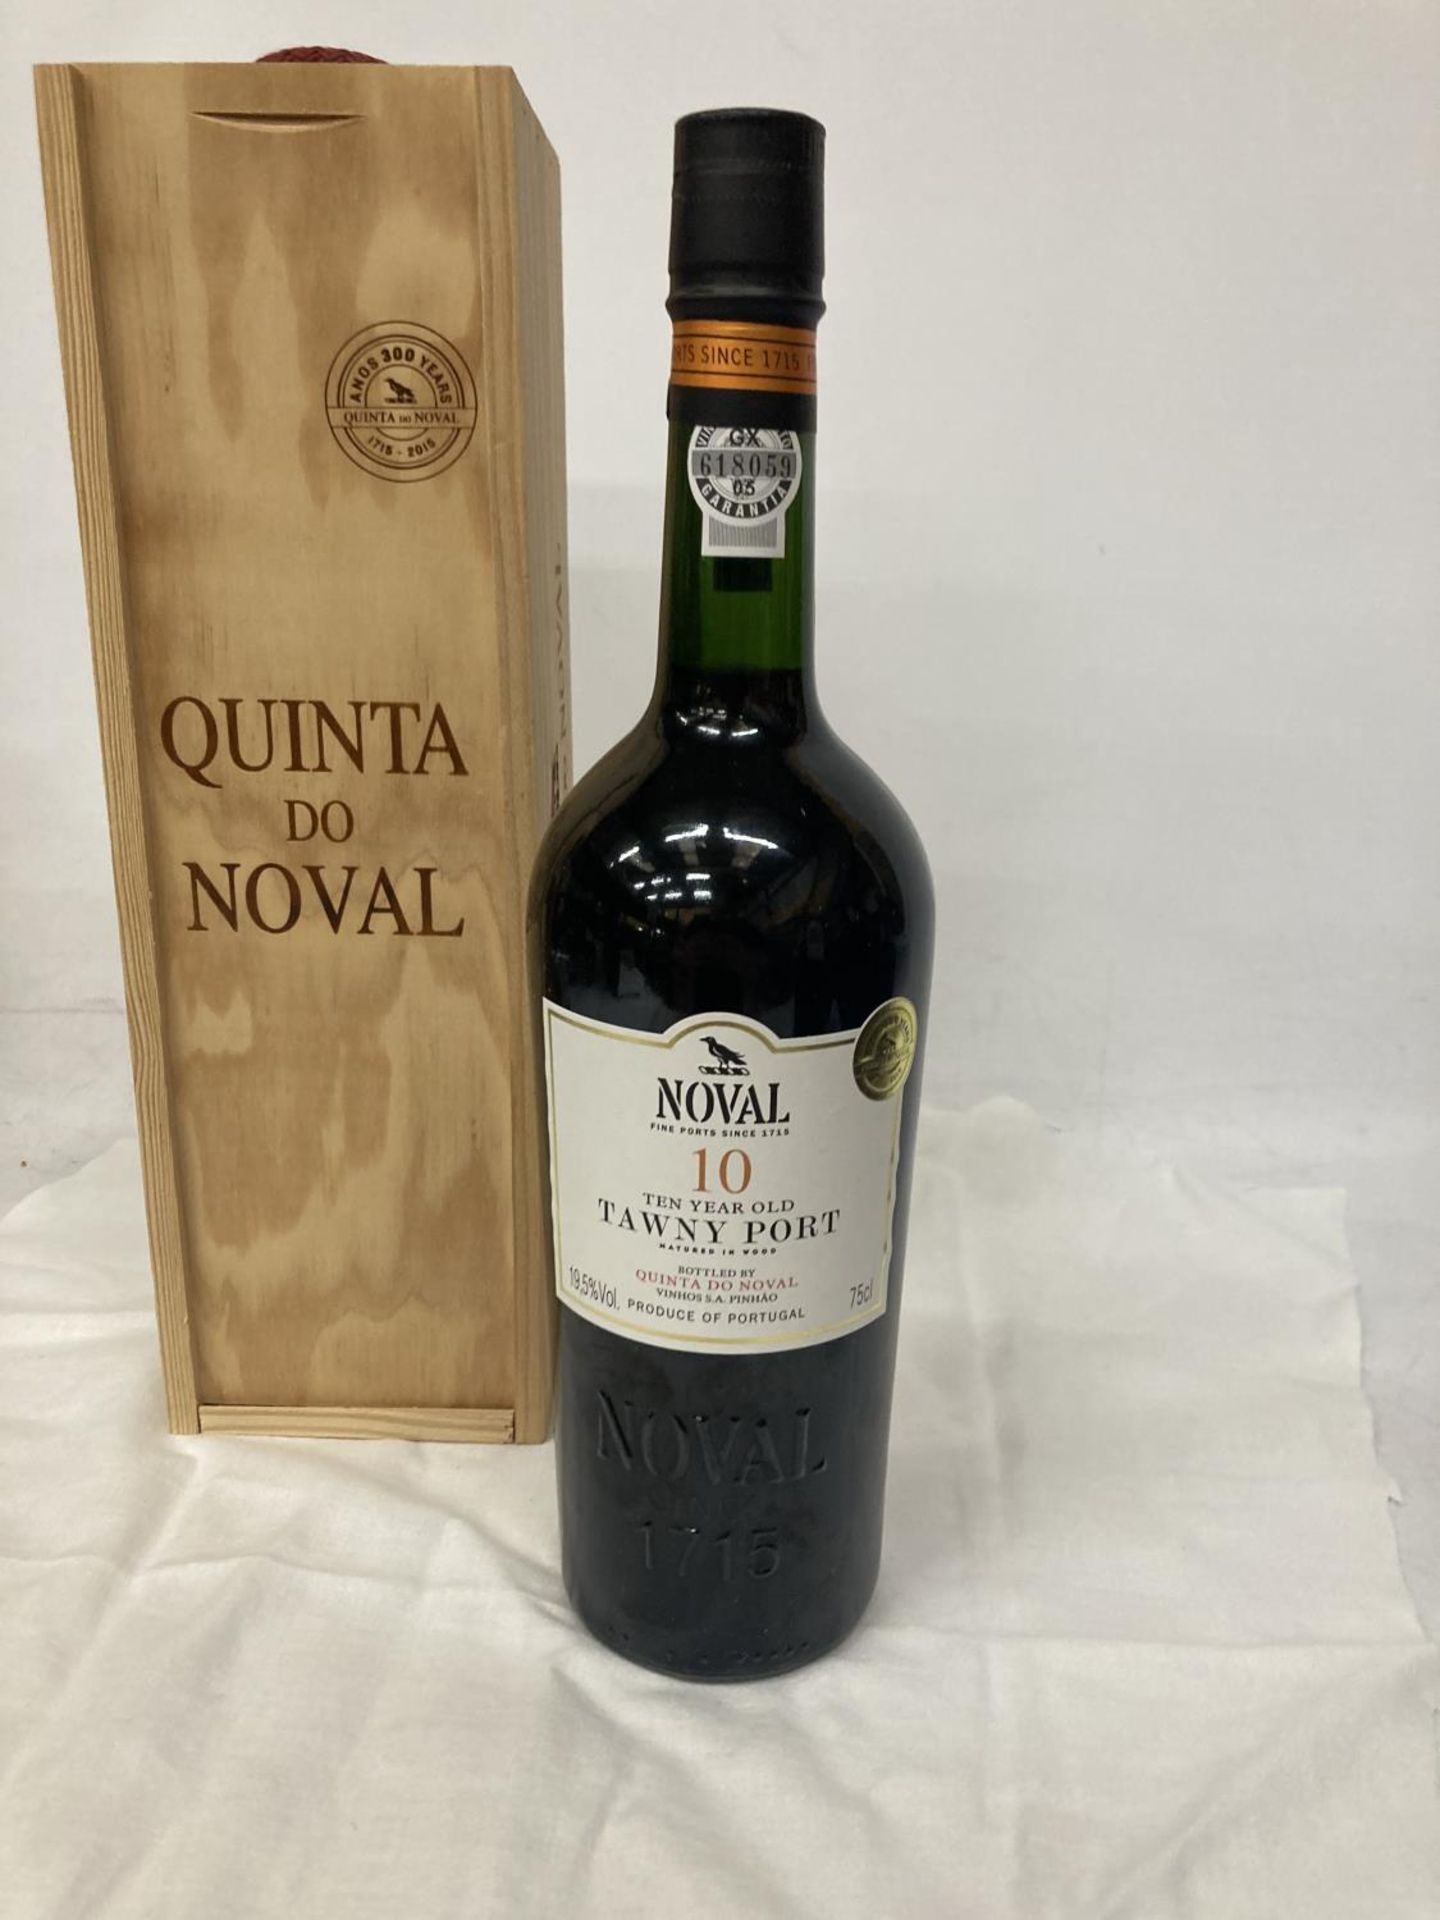 A 75CL BOTTLE OF NOVAL 10 YEAR OLD TAWNY PORT IN A WOODEN BOX